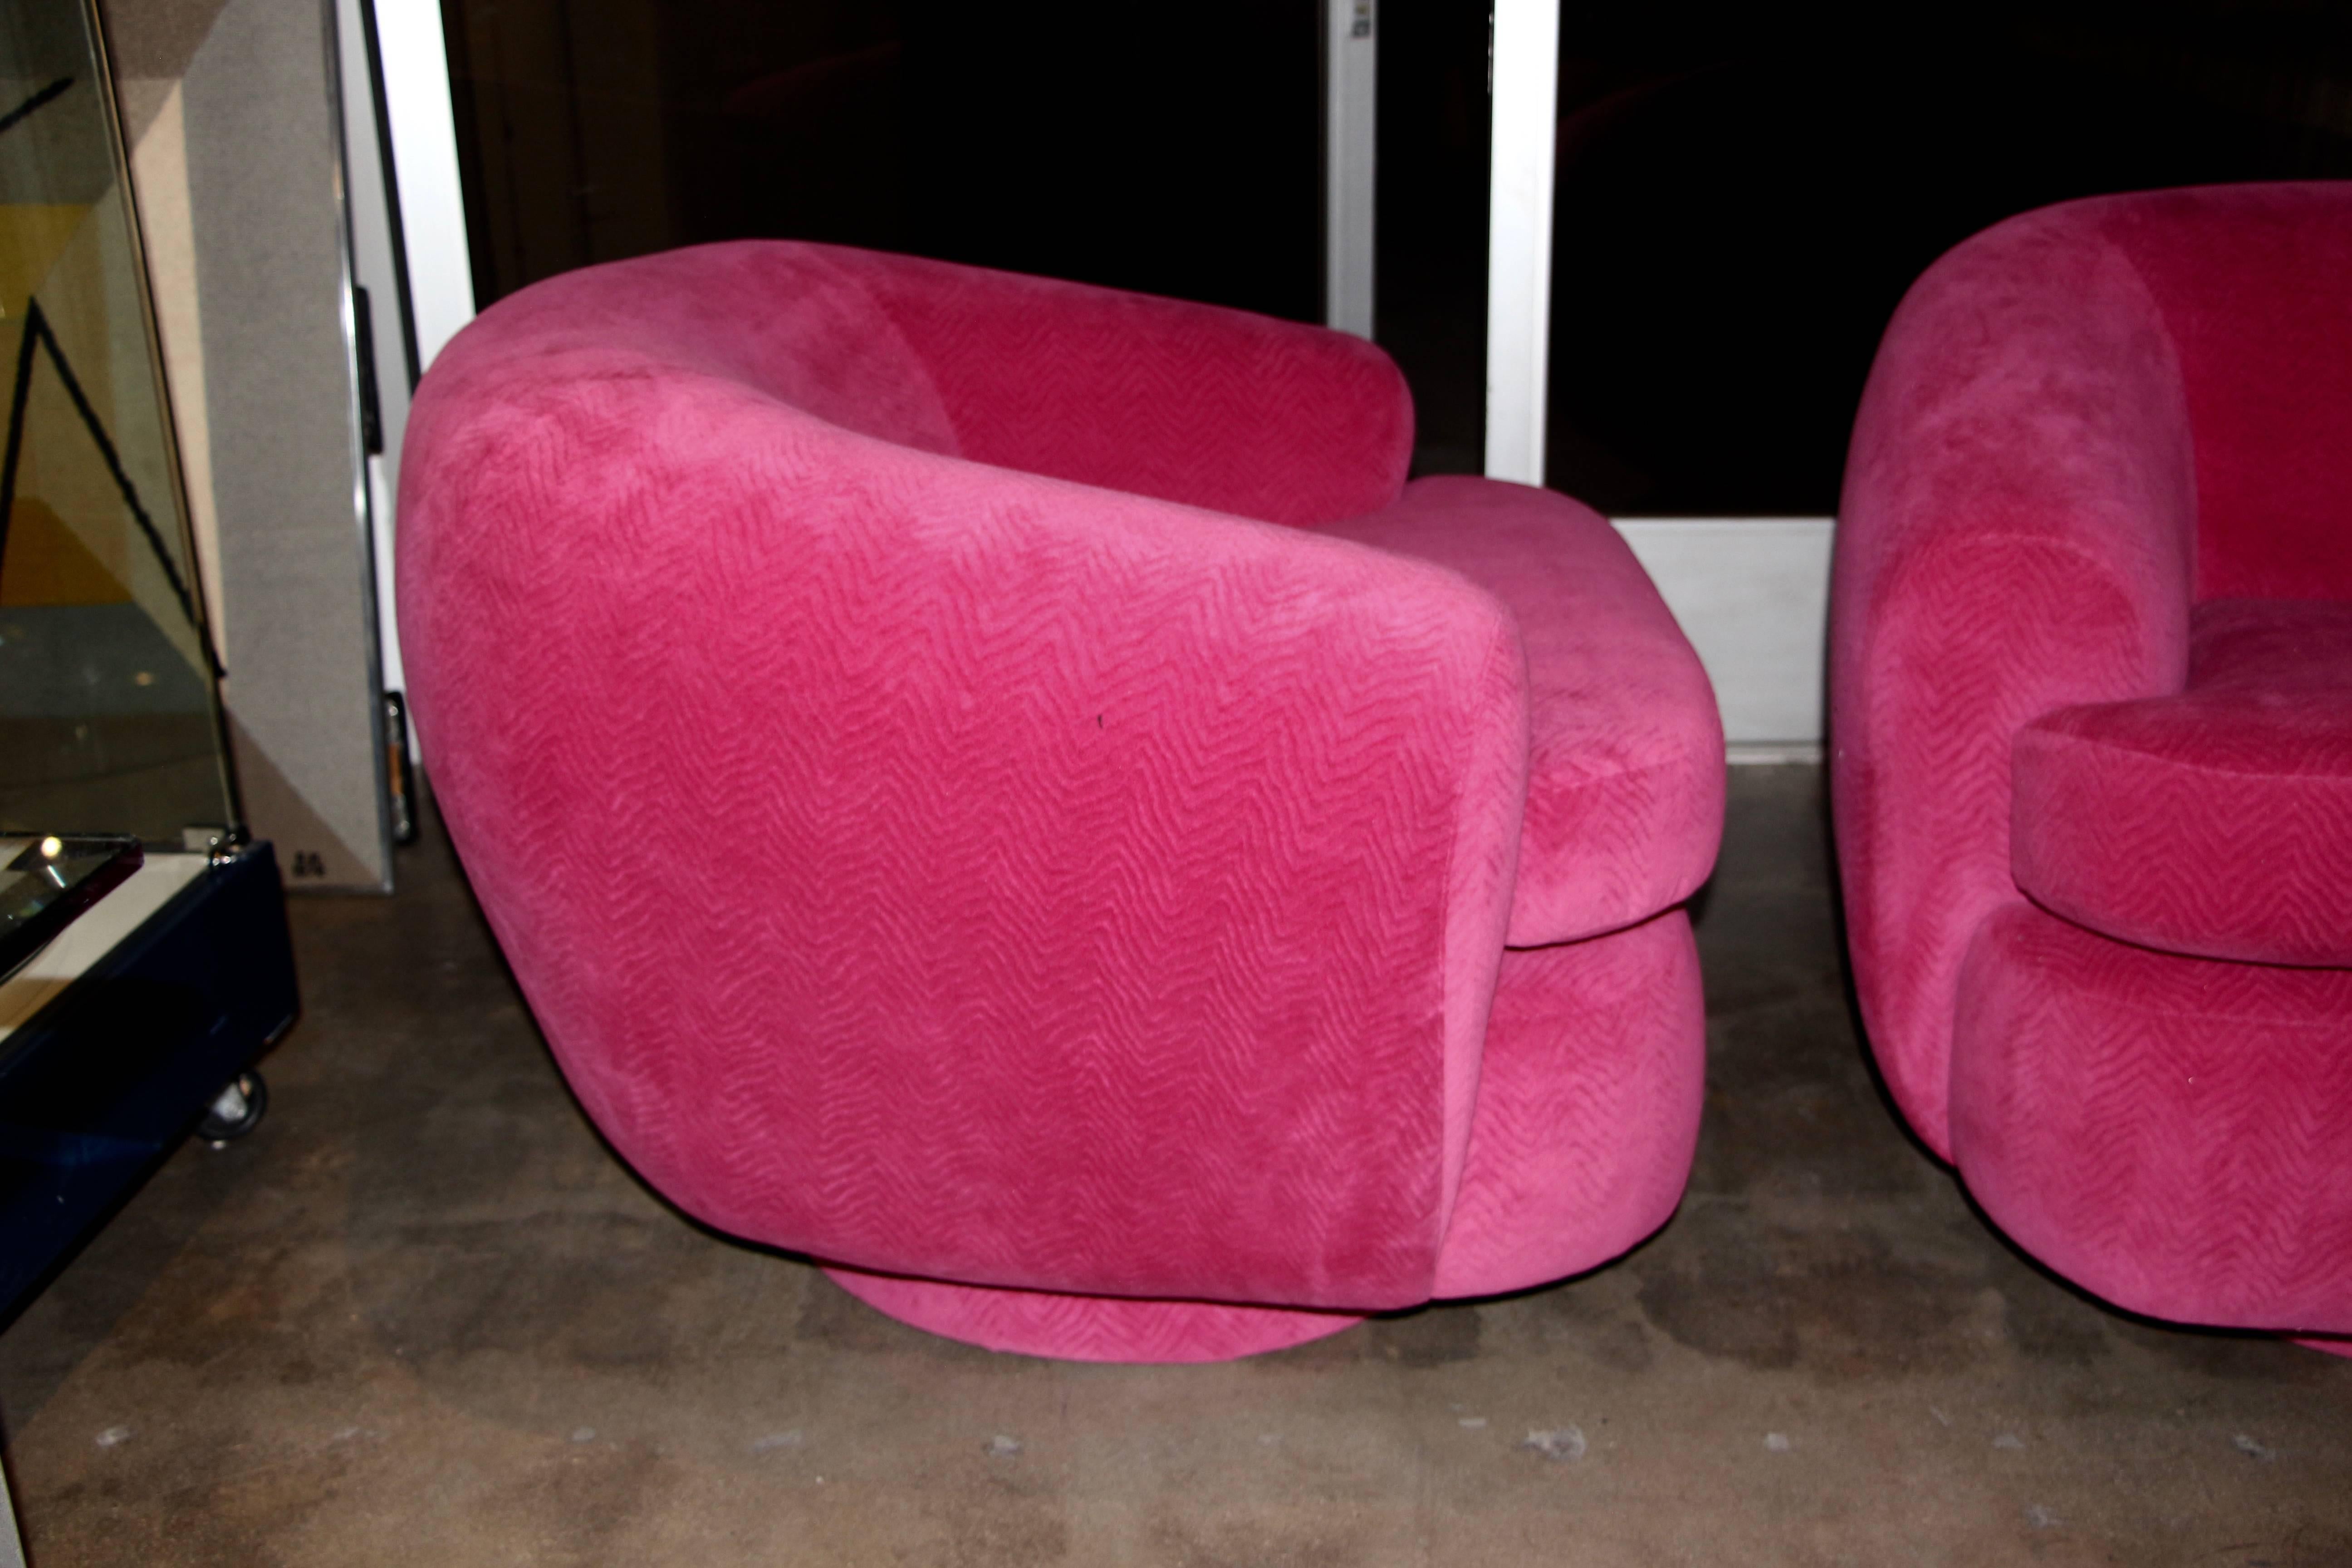 A wonderful pair of newly upholstered club or lounge chairs in a pink wool mohair. These chairs have been completely redone and are on upholstered swivel bases. Extremely comfortable and they make a great statement. These chairs have great